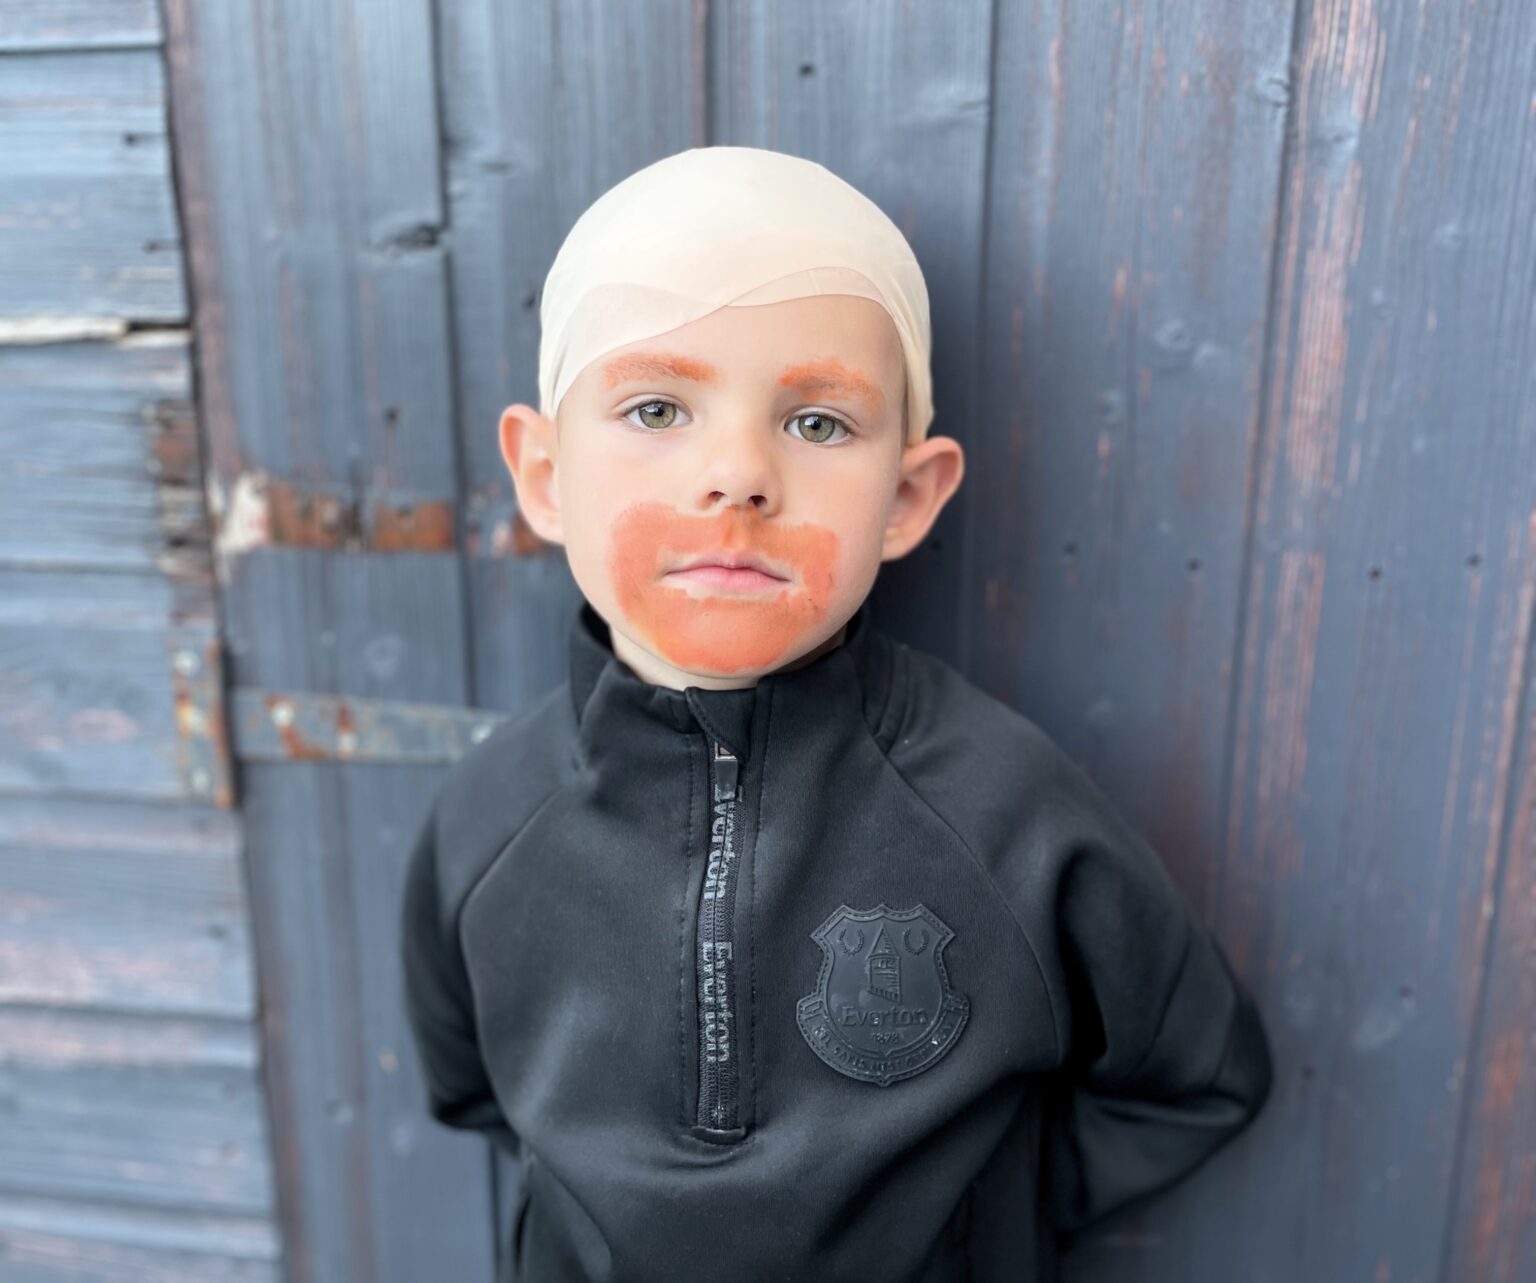 A five-year-old boy surprises teachers by dressing up as Everton manager Sean Dyche for sports week, opting for a unique look instead of the usual footballer attire.